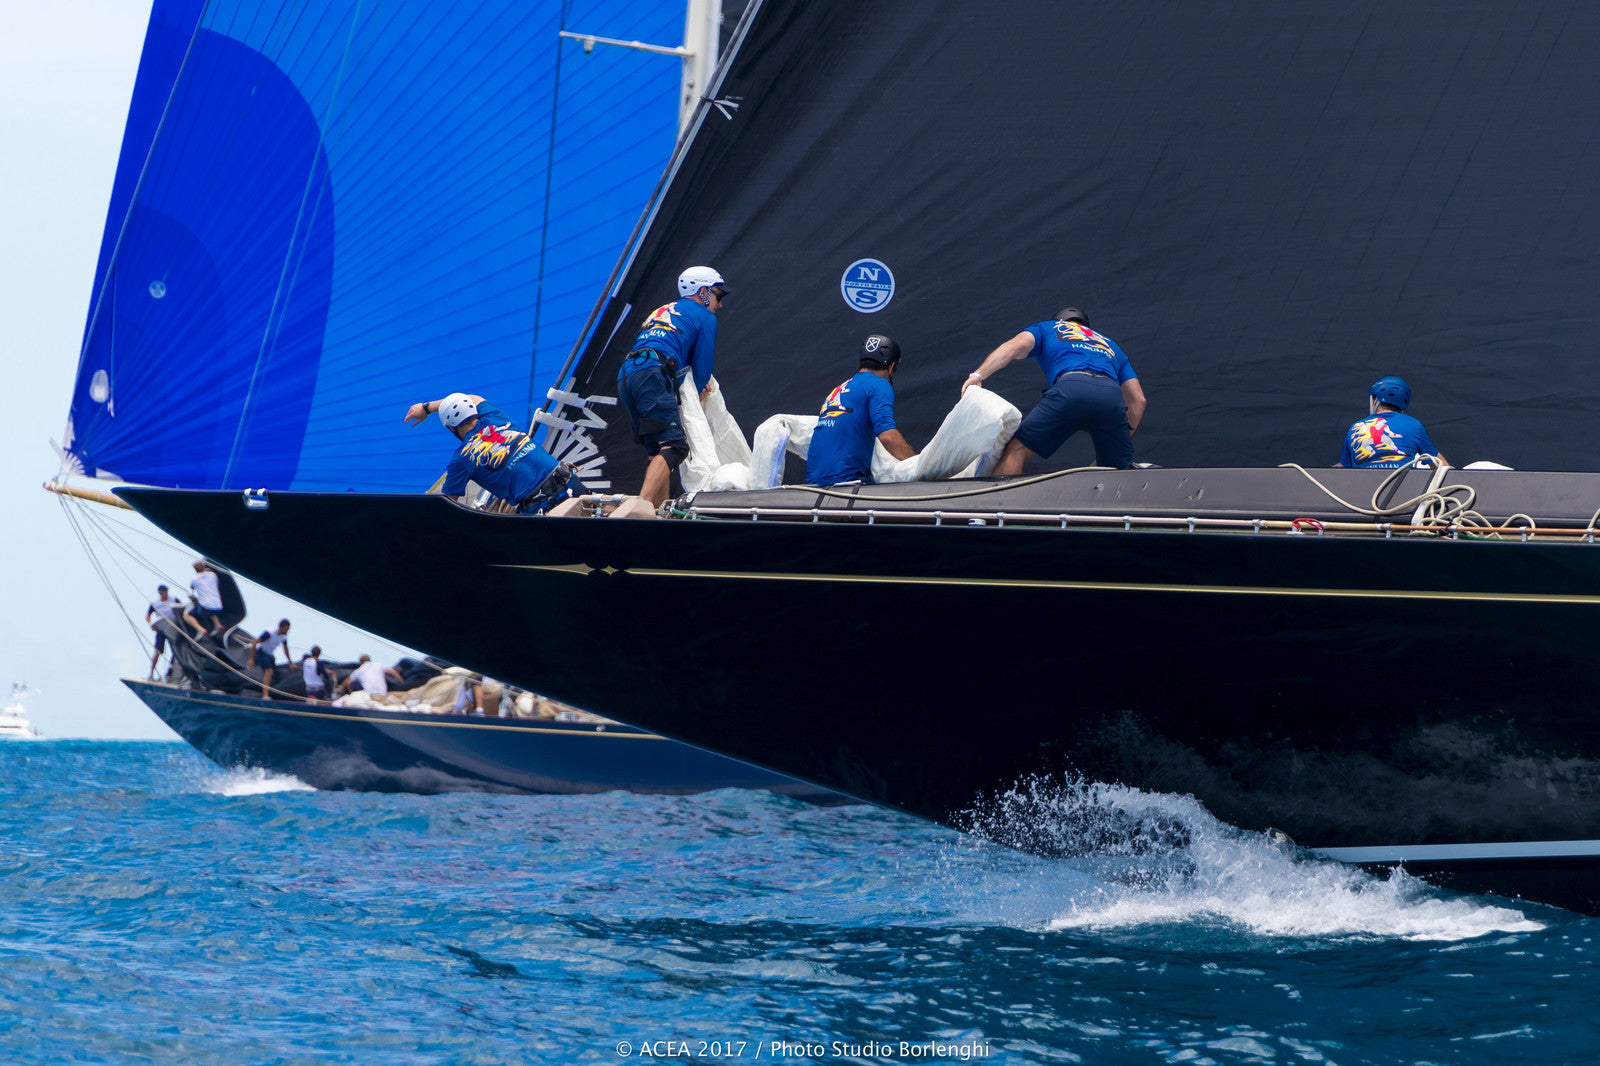 J CLASS BATTLE FOR THE KOHLER CUP POINTS IN BERMUDA